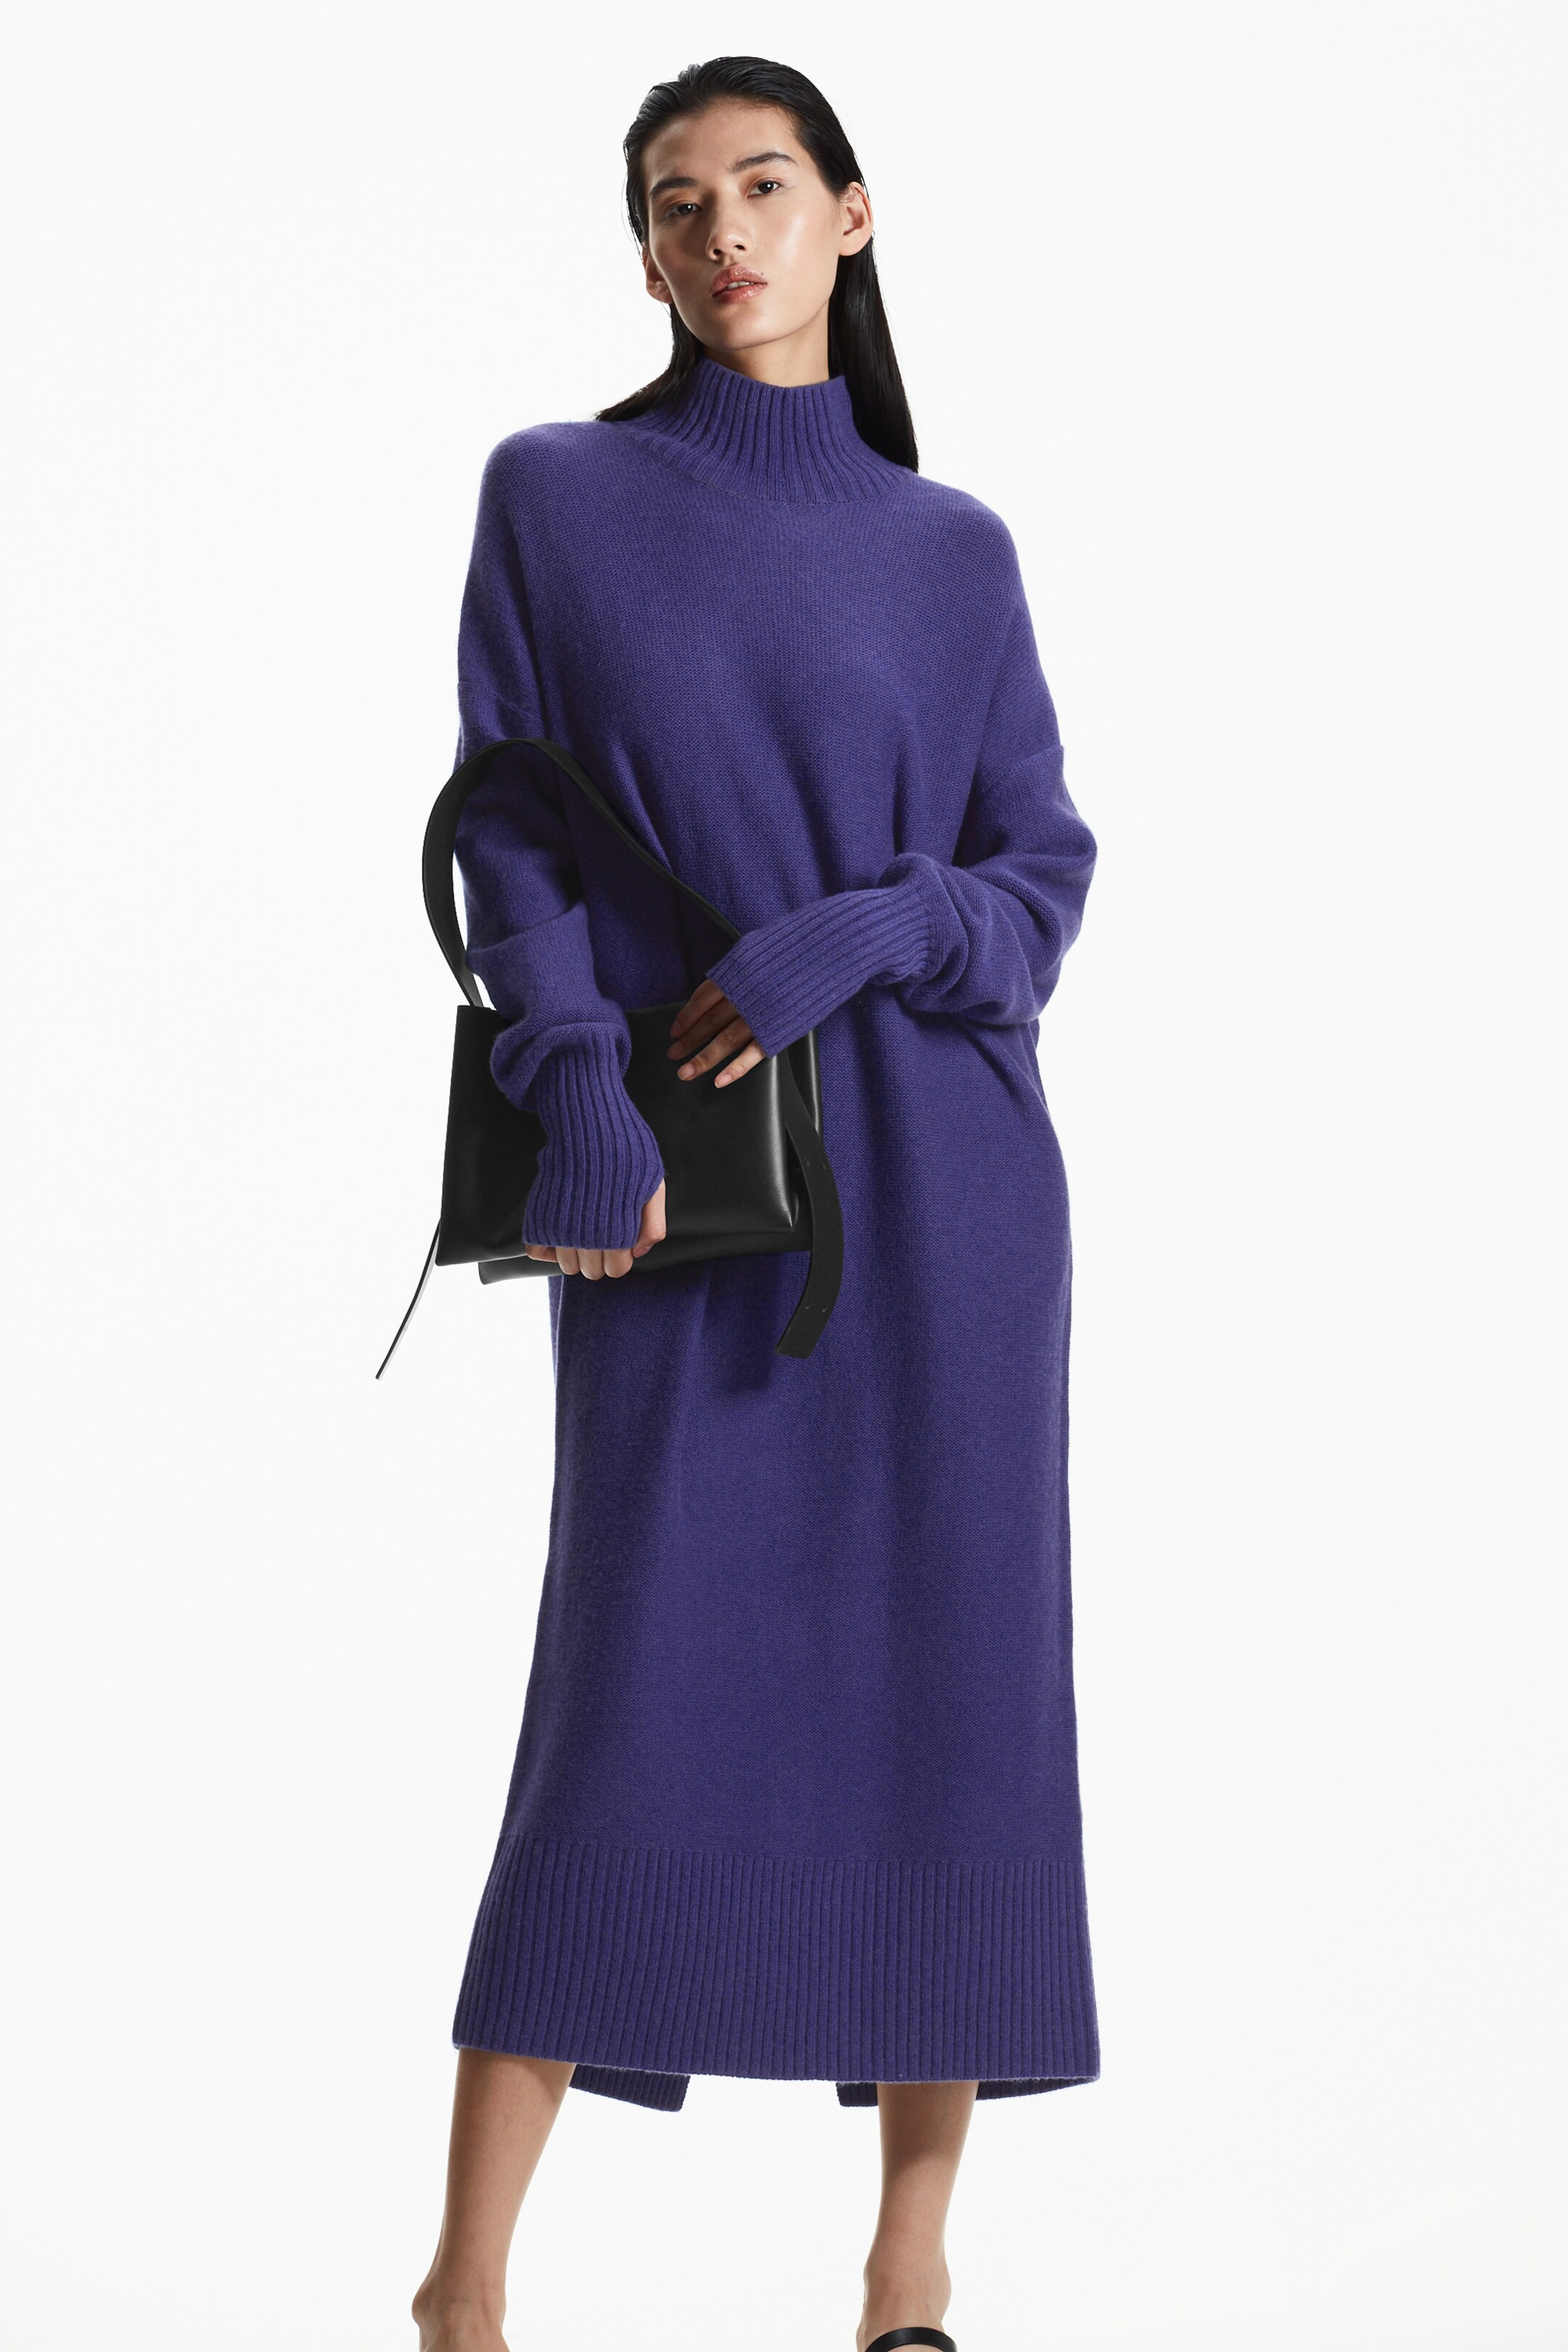 Front image of cos LONGLINE KNITTED DRESS in INDIGO BLUE